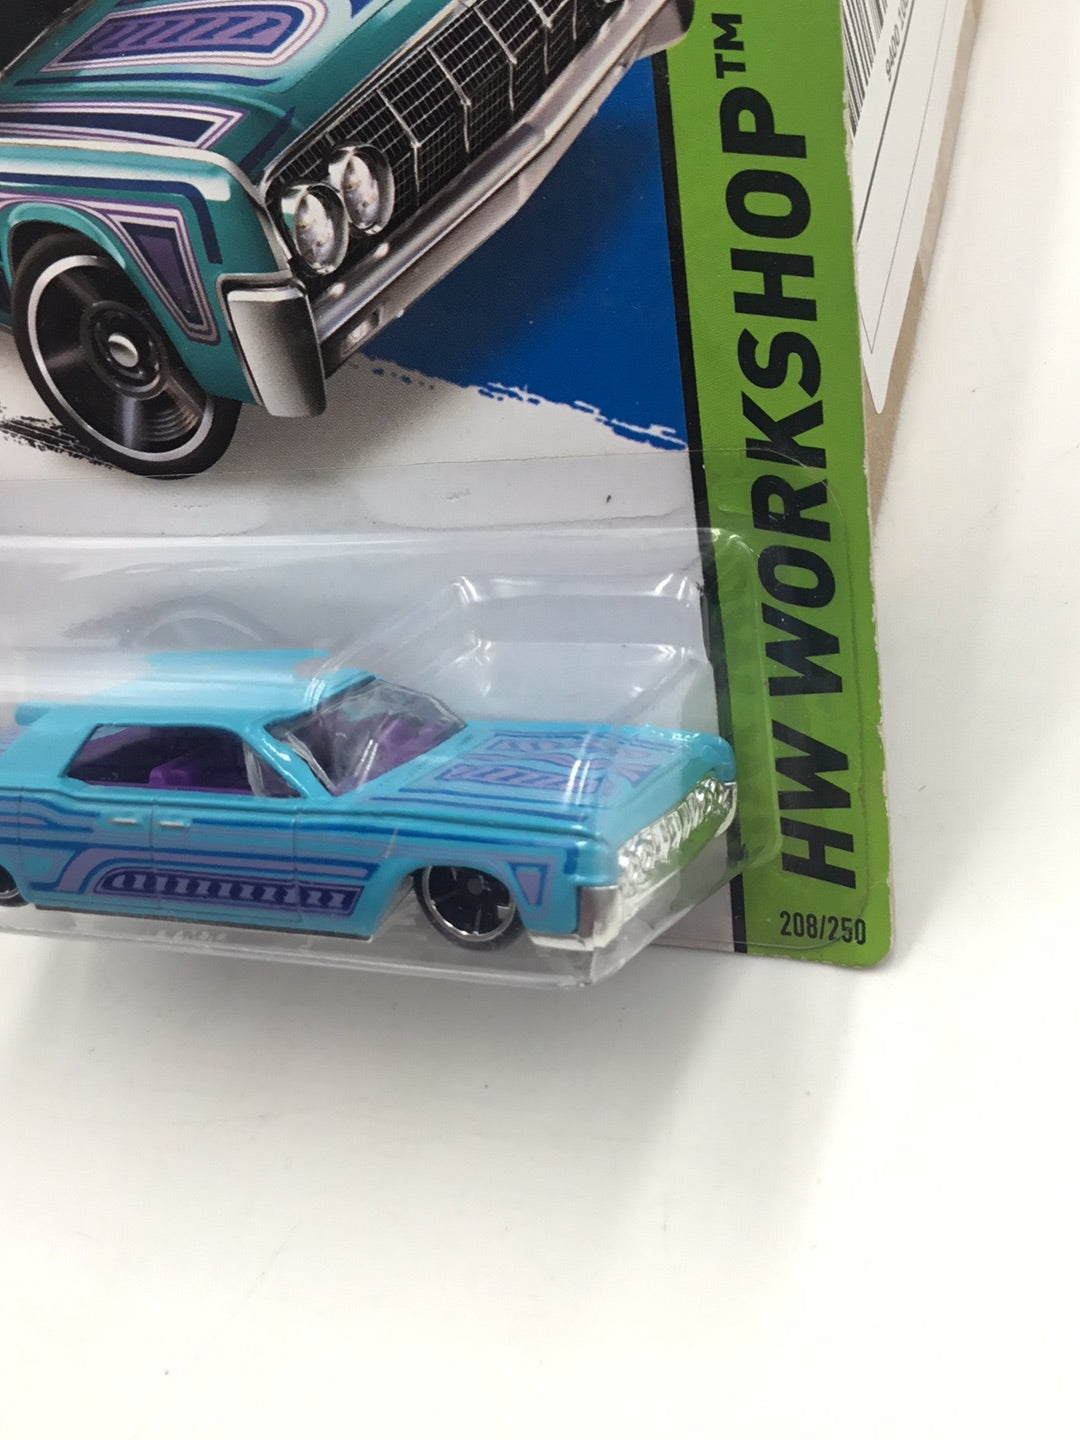 2014 Hot Wheels #208 64 Lincoln Continental S2